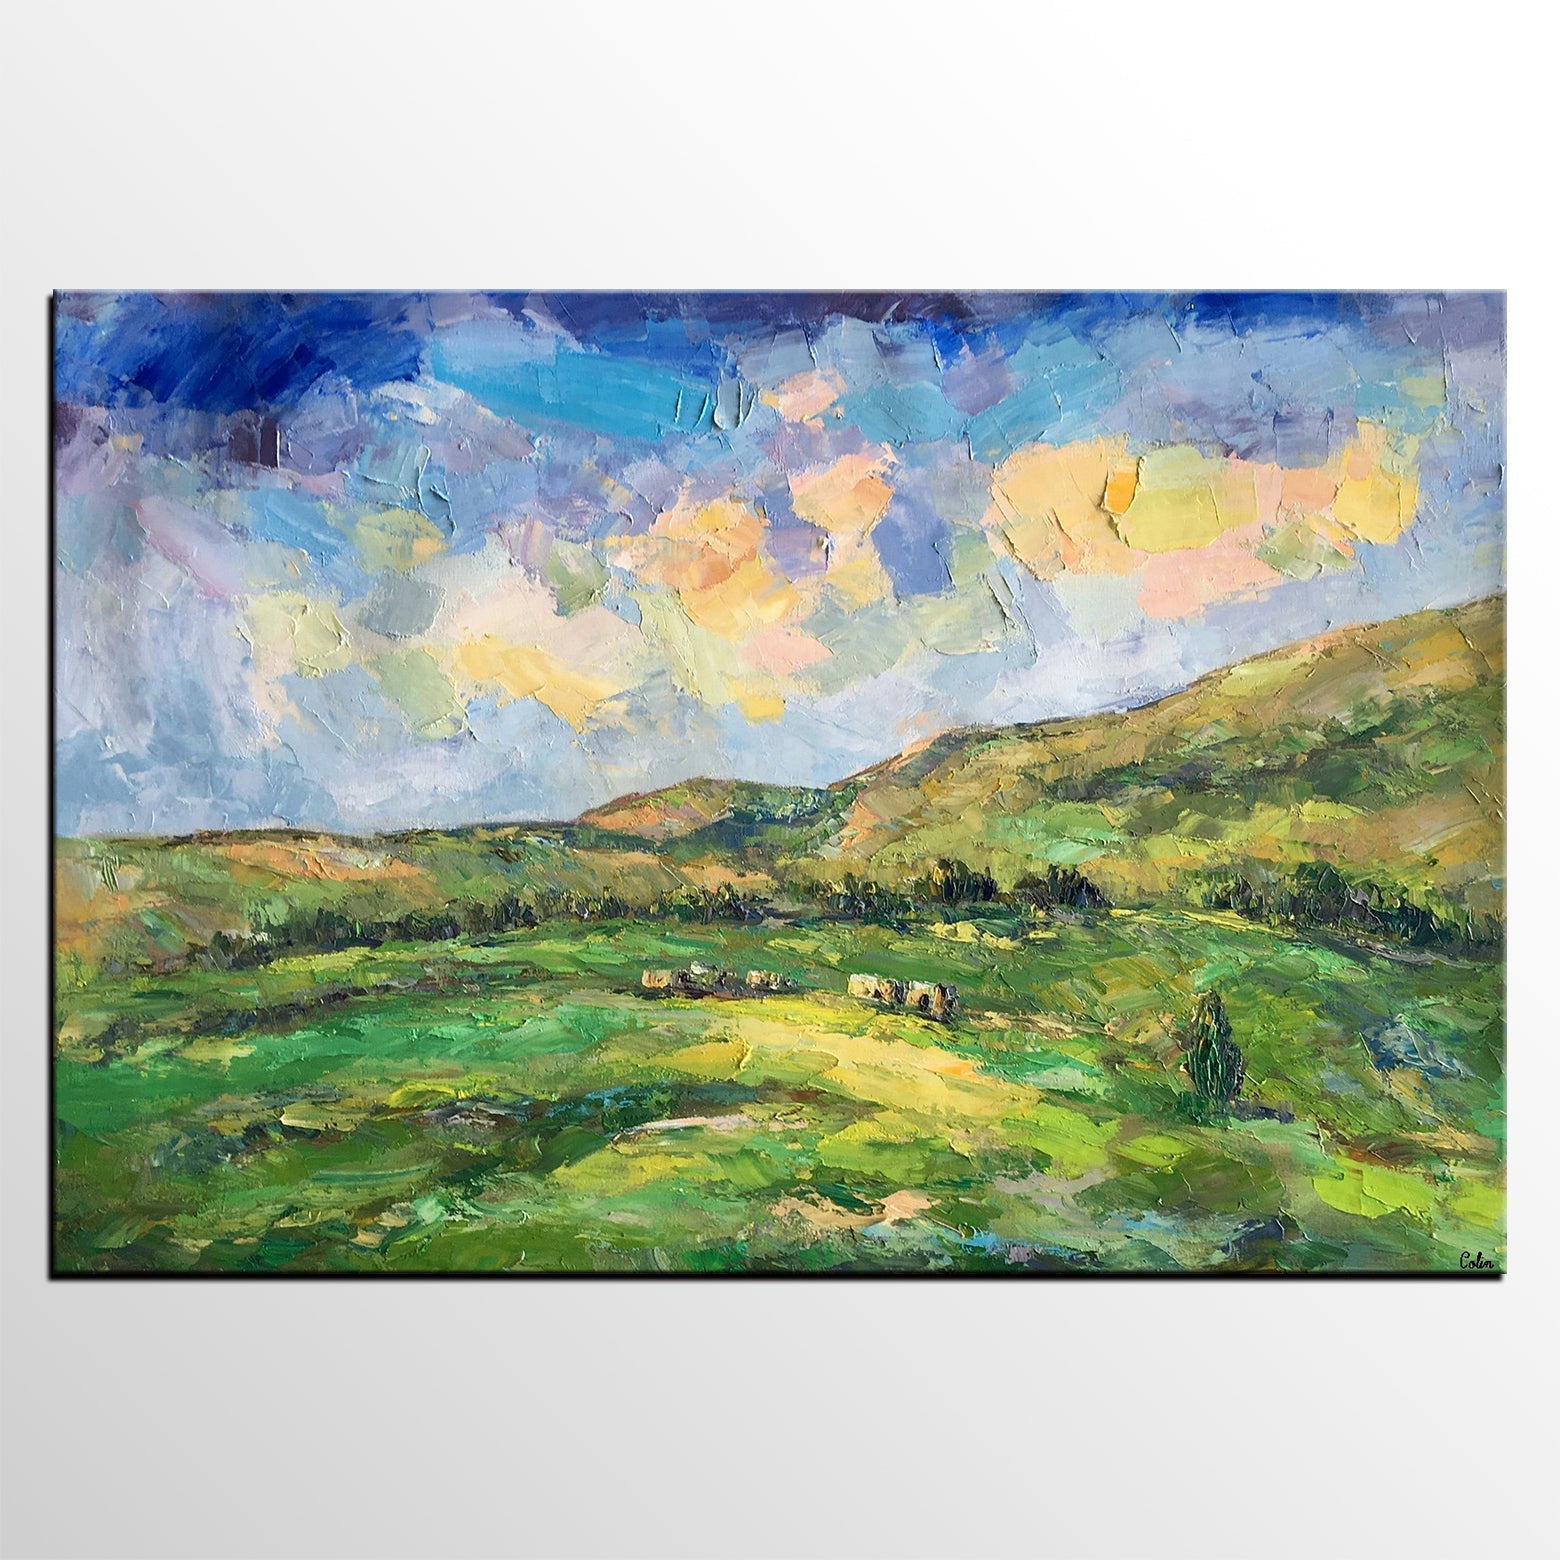 Landscape Painting for Sale, Mountain Painting, Custom Original Landscape Painting on Canvas, Landscape Painting for Living Room-Art Painting Canvas